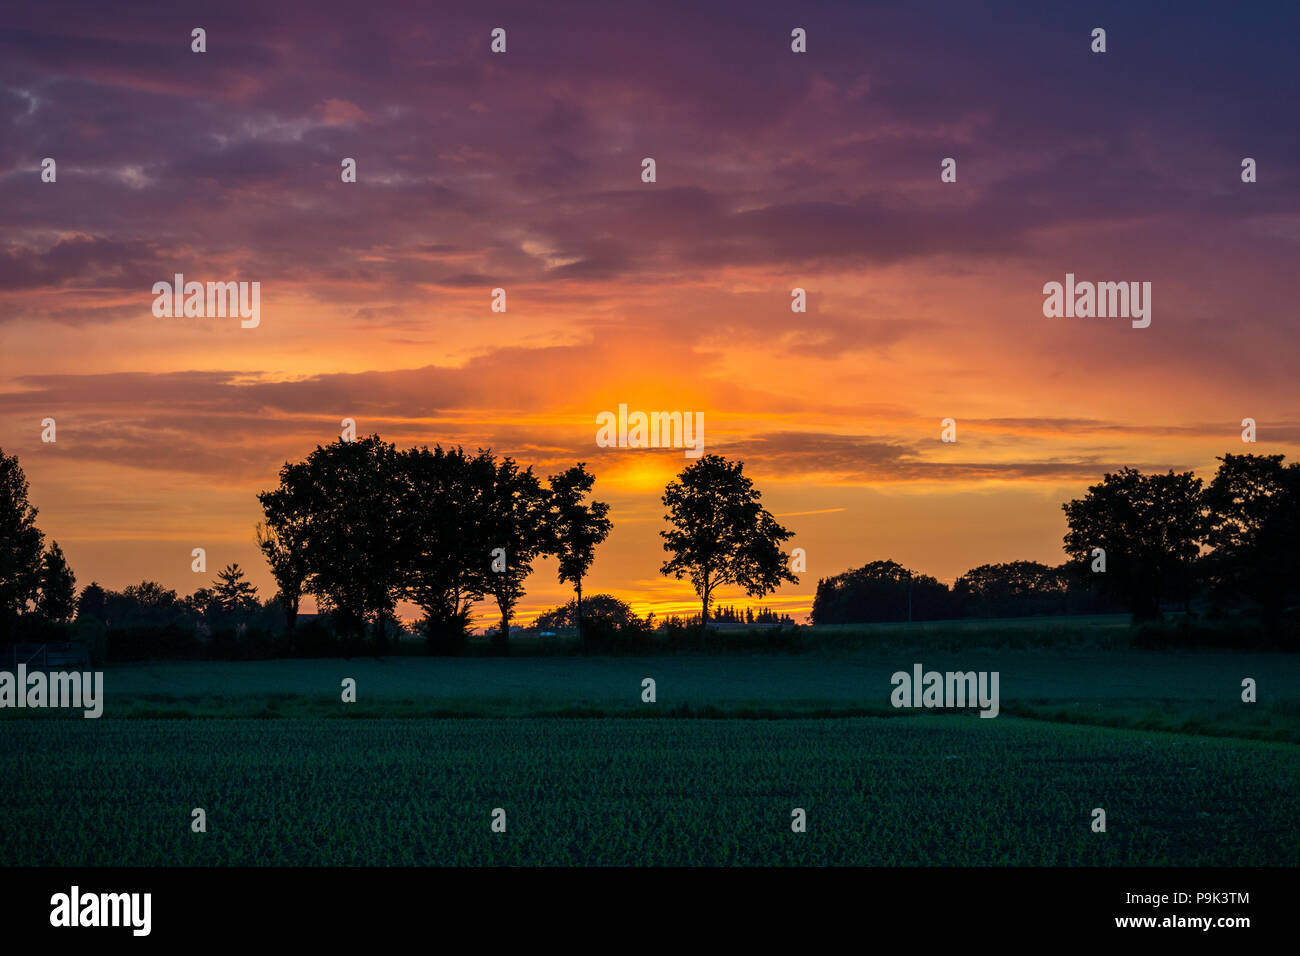 Colorful sunset sky over green fields and silhouette of trees Stock Photo